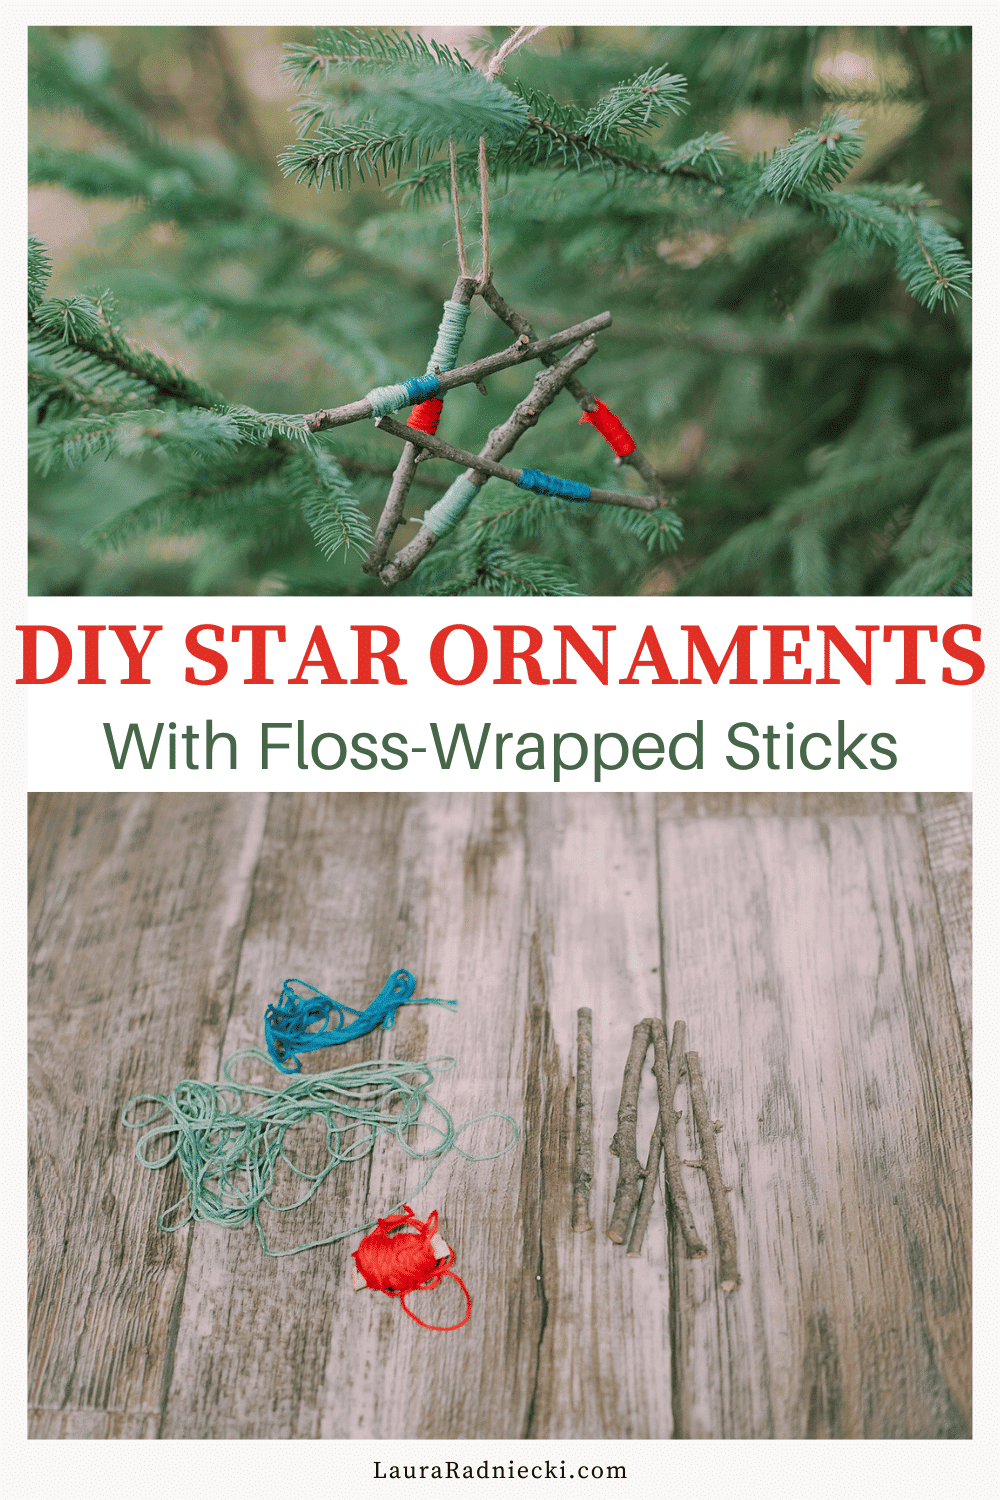 How to Make a Star Ornament out of Embroidery Floss Wrapped Sticks